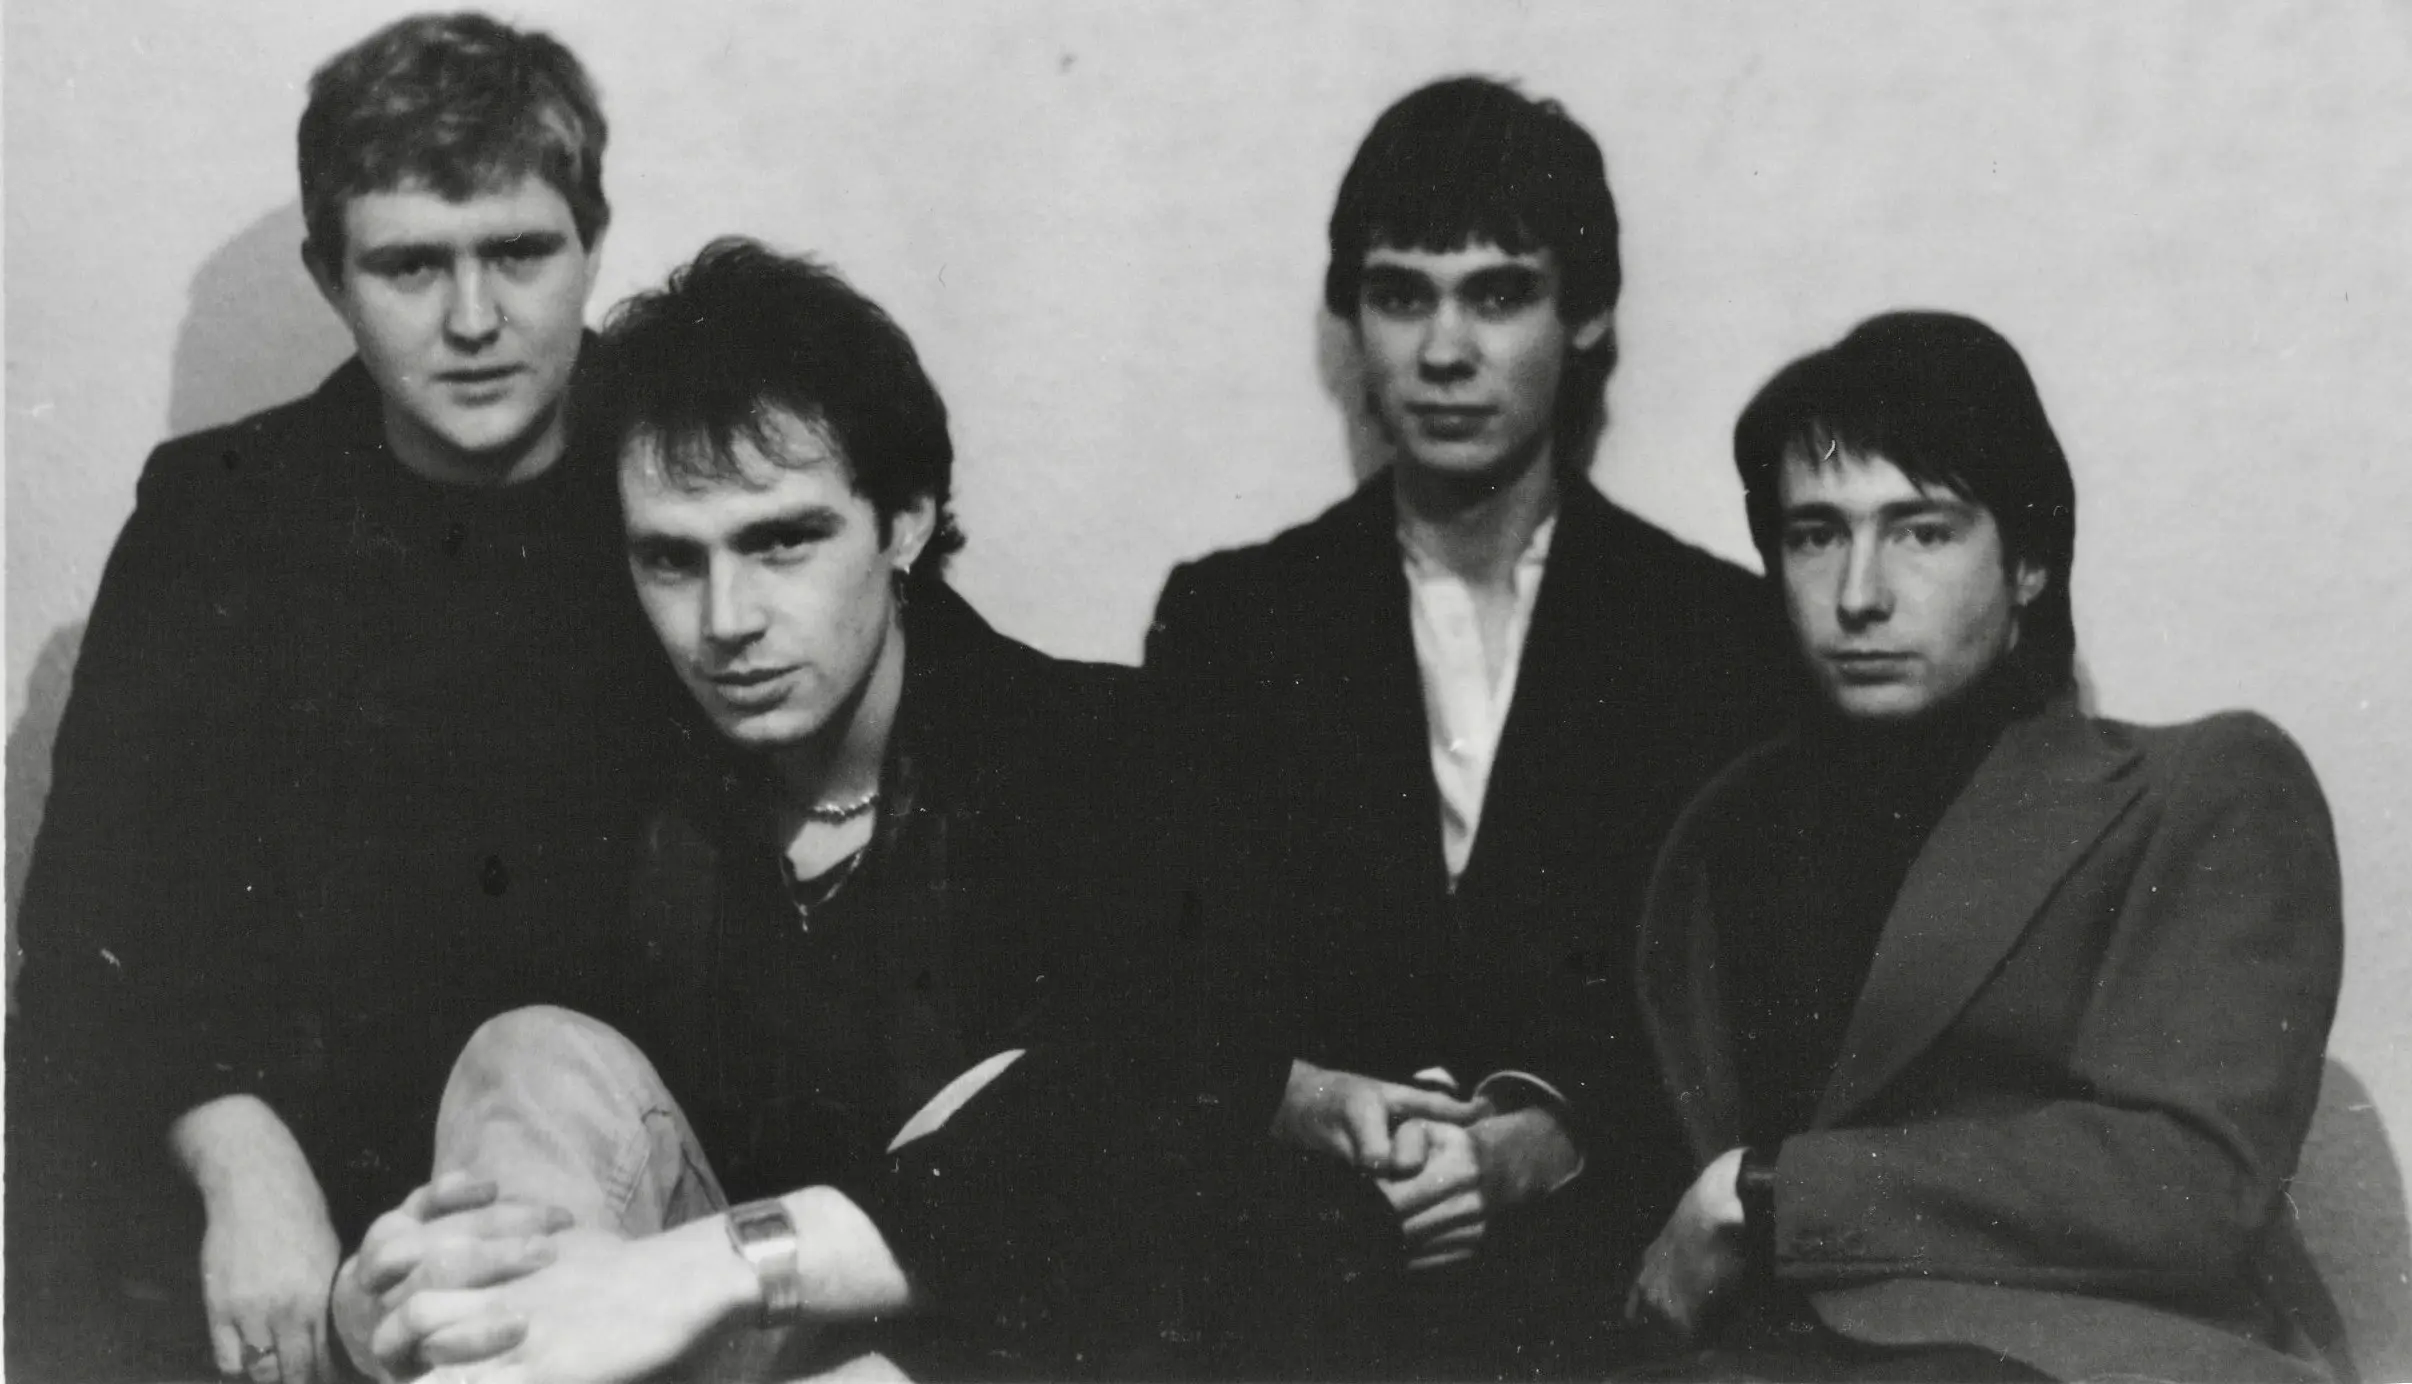 A black and white promotional picture of the band Red Line